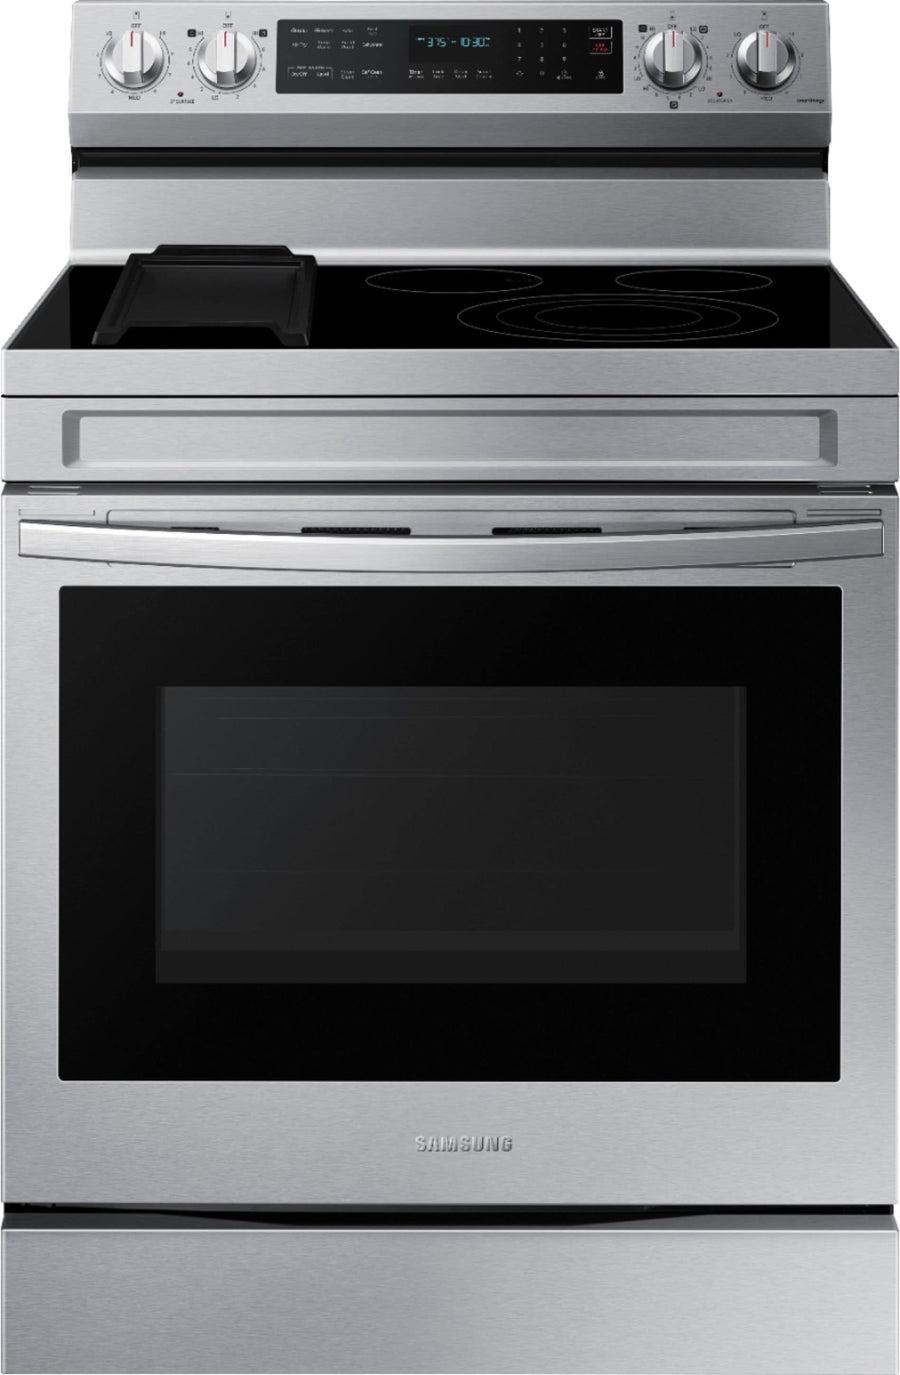 Samsung - 6.3 cu. ft. Freestanding Electric Convection+ Range with WiFi, No-Preheat Air Fry and Griddle - Stainless steel_0